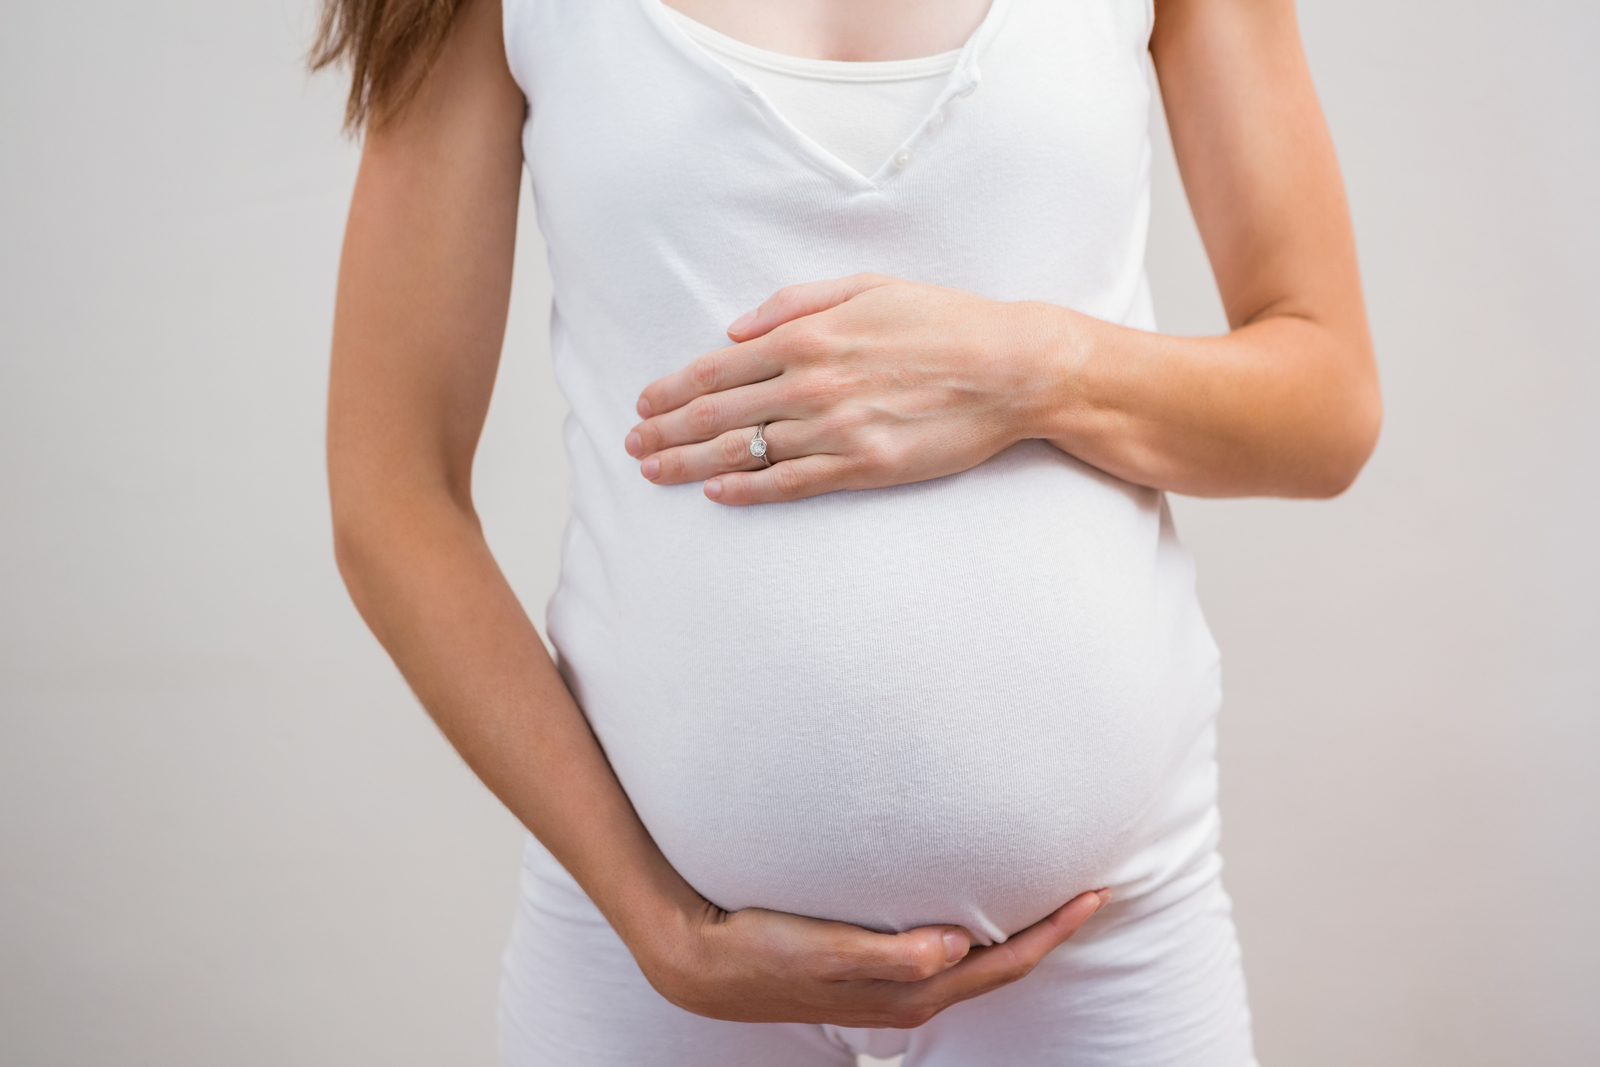 The Safety Factors Of Dental Work While Pregnant